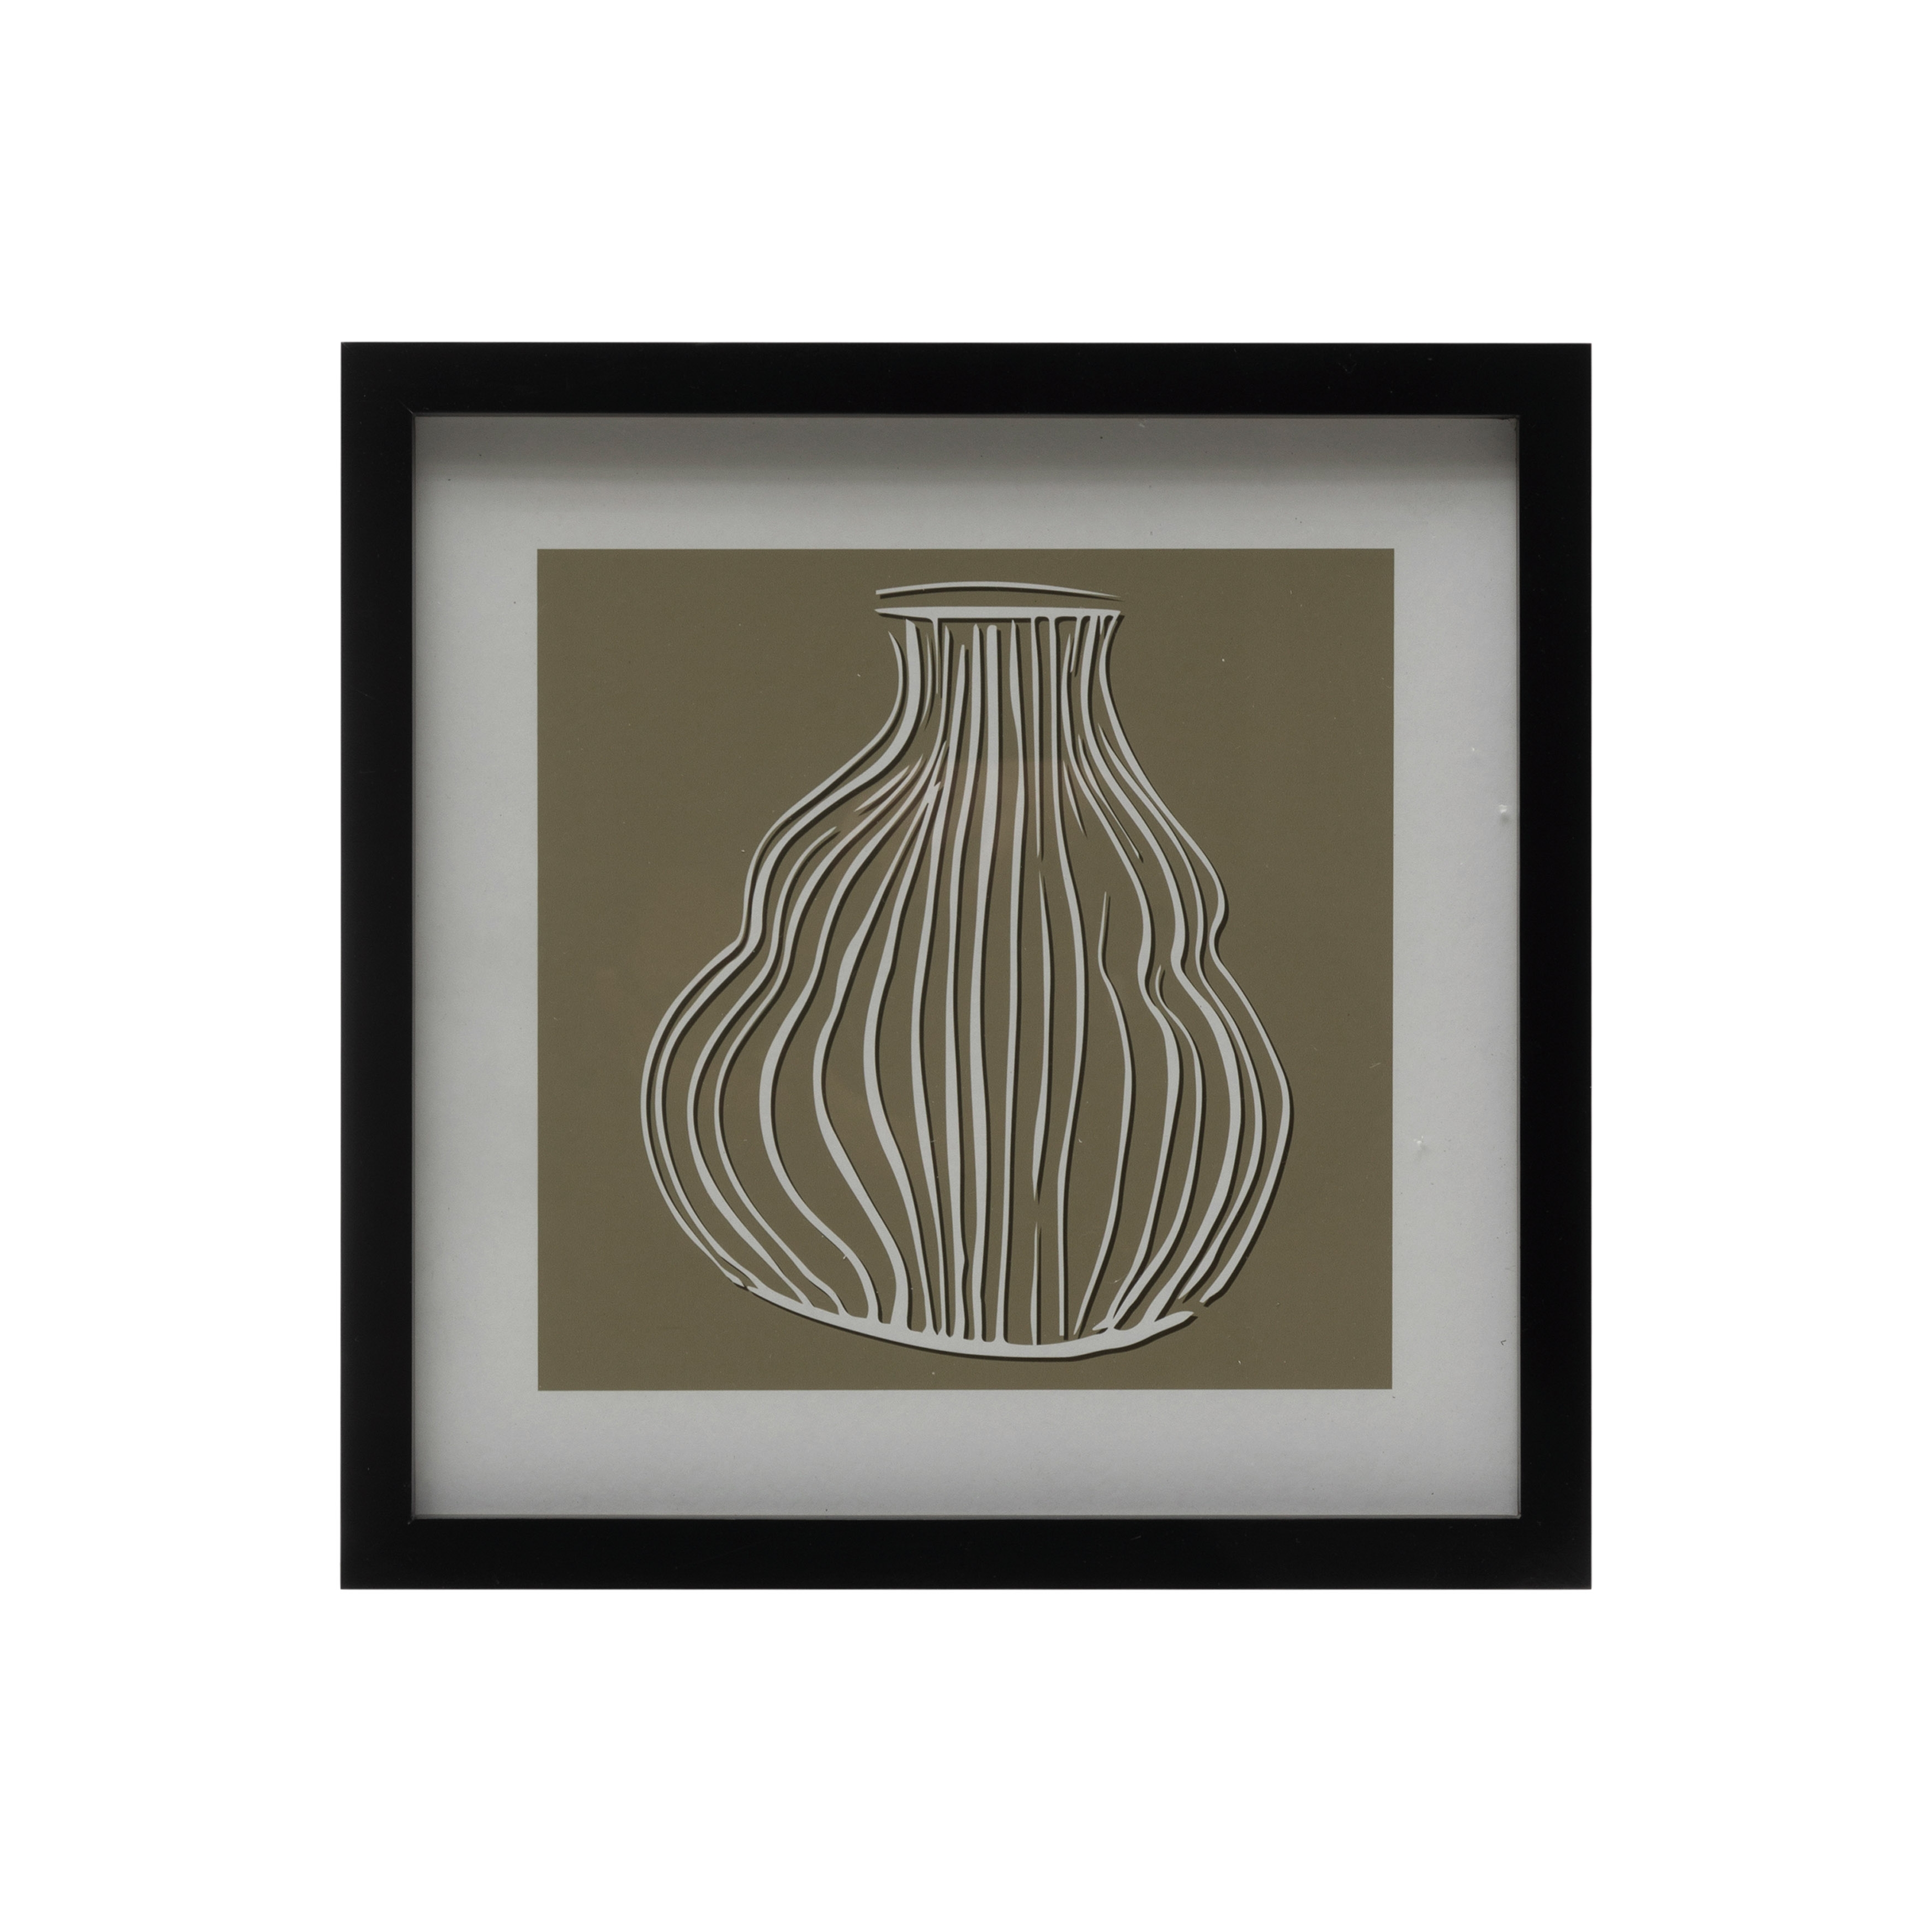  Wood Framed Glass Wall Décor with Vase Print, Beige and White - Image 0